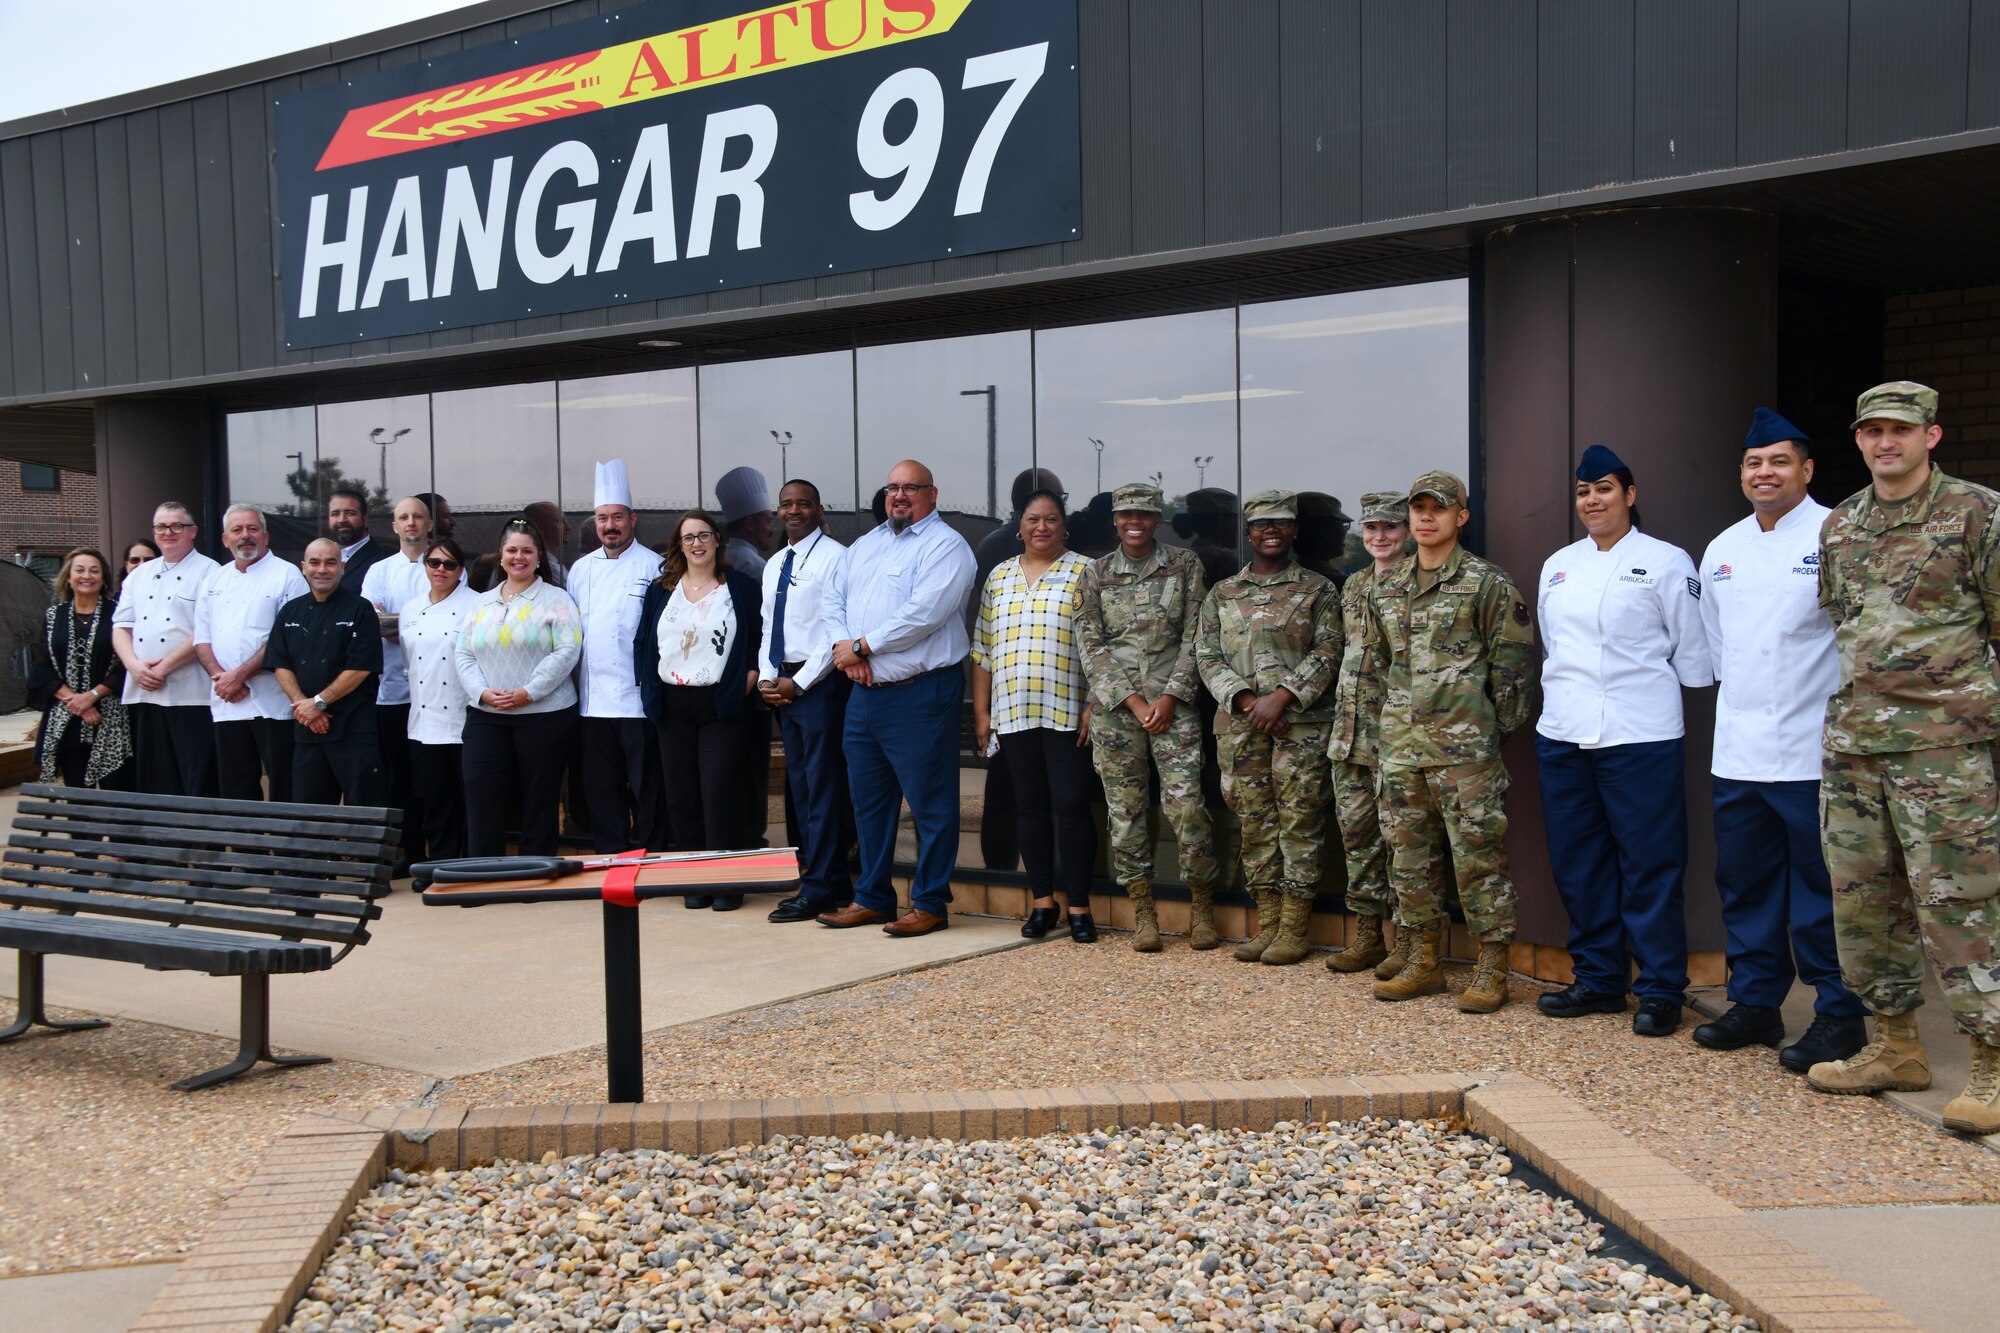 Members of the 97th Force Support Squadron sustainment services flight pose for a photo in front of Hangar 97 at Altus Air Force Base, Oklahoma, April 28, 2022. The facility reopened after 12 months of renovation. (U.S. Air Force photo by Airman 1st Class Miyah Gray)